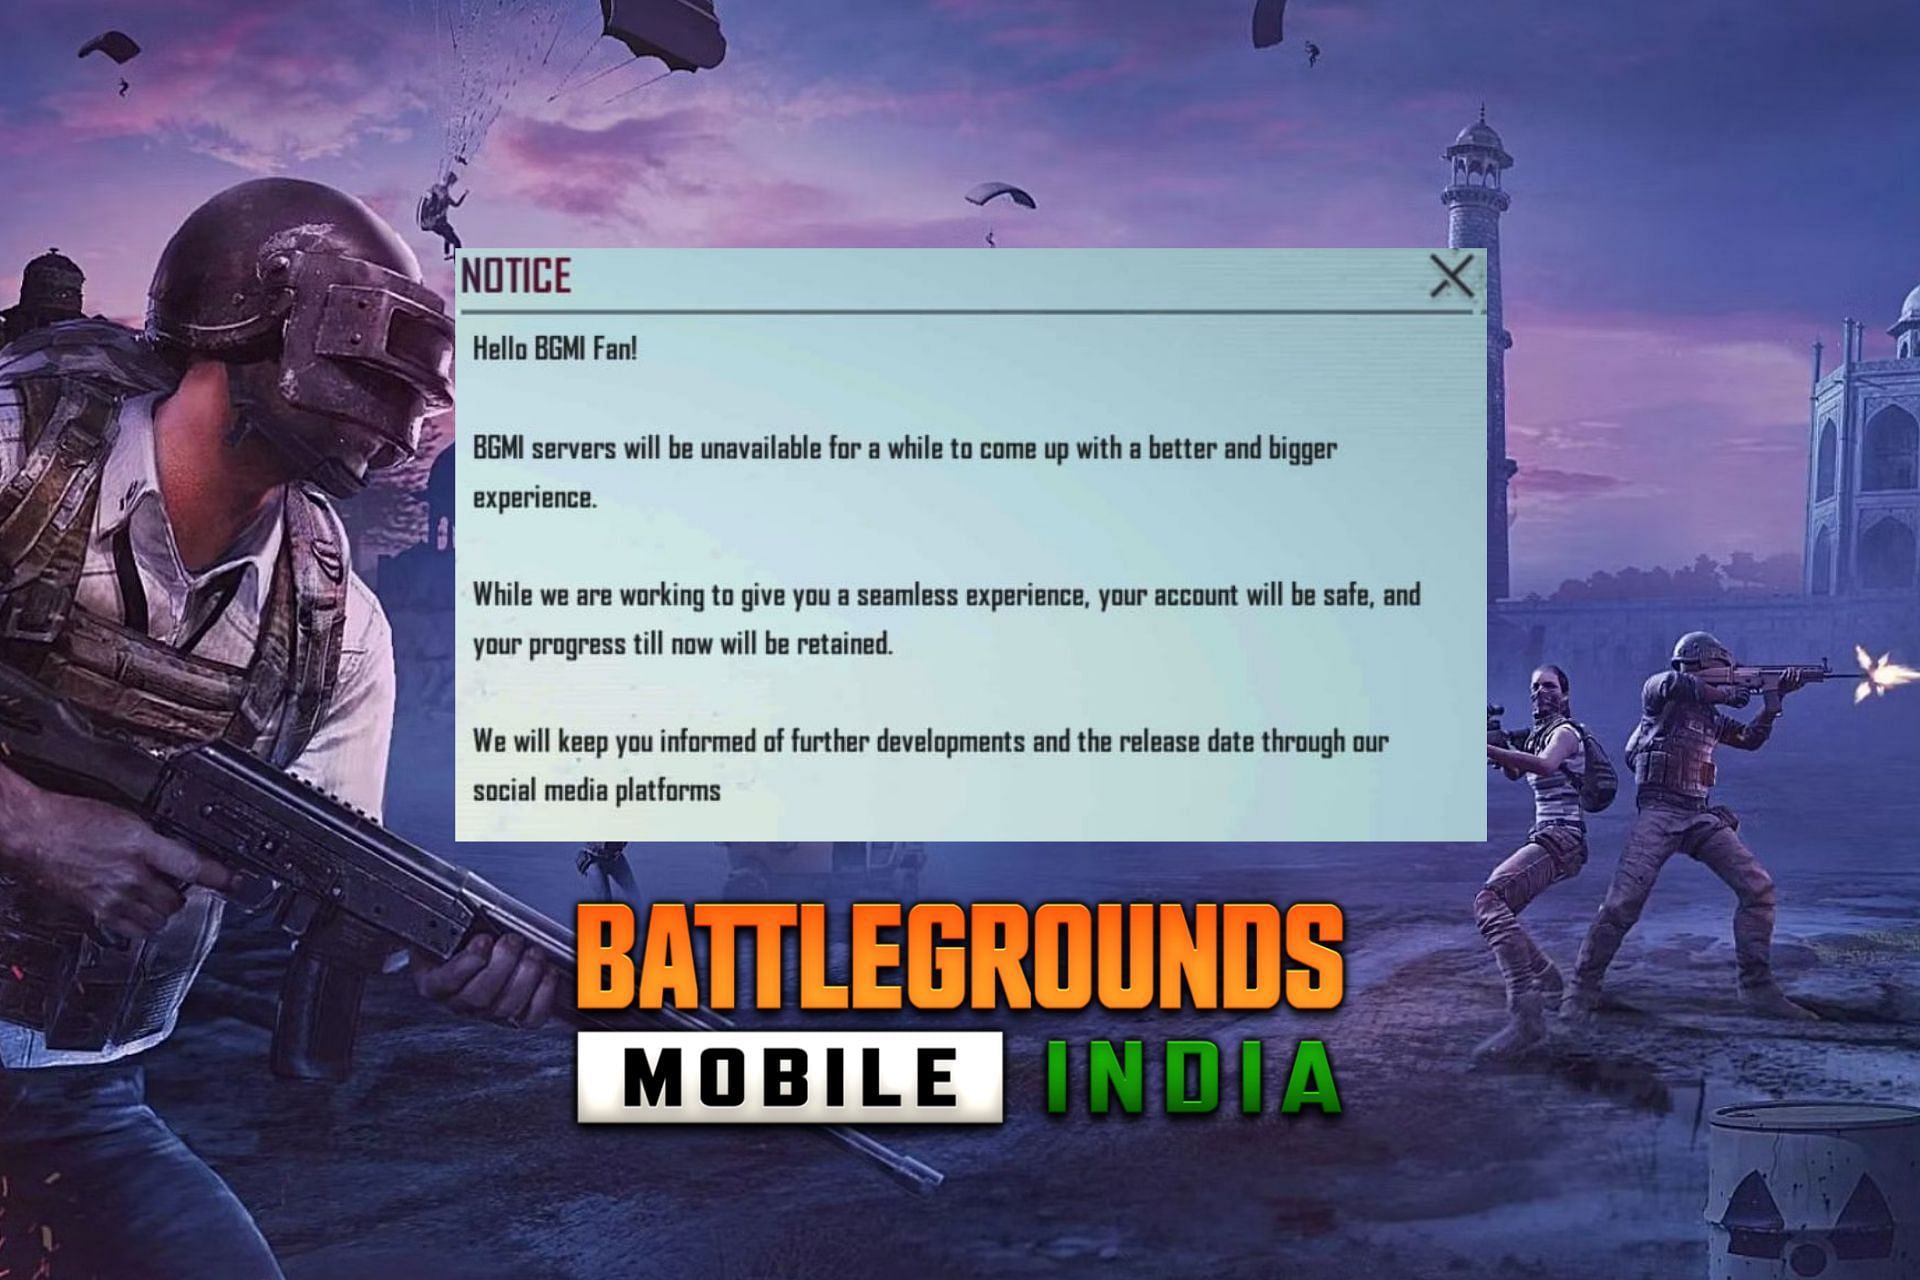 Download failed because you may not have purchased this app pubg mobile что делать фото 30